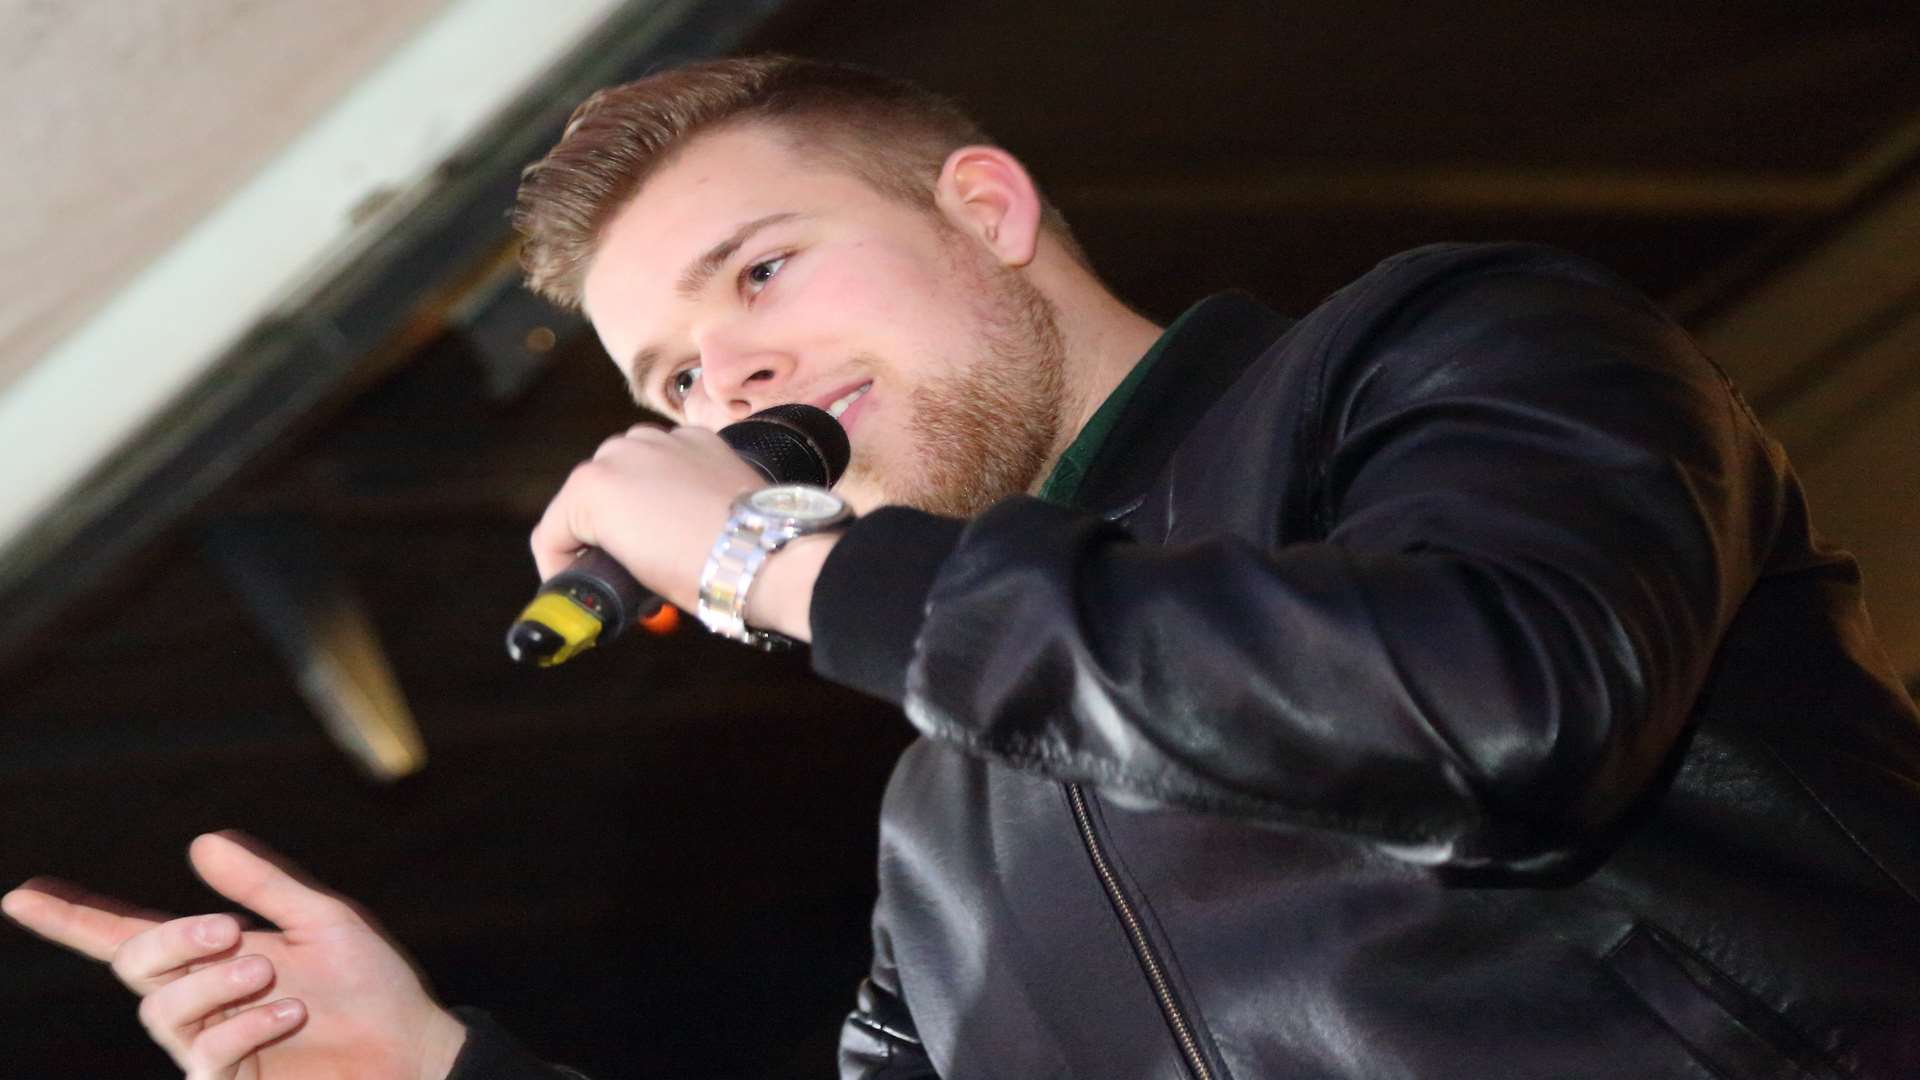 Singer Jamie Johnson will be performing as part of Gravesham council's Christmas Everyday events programme